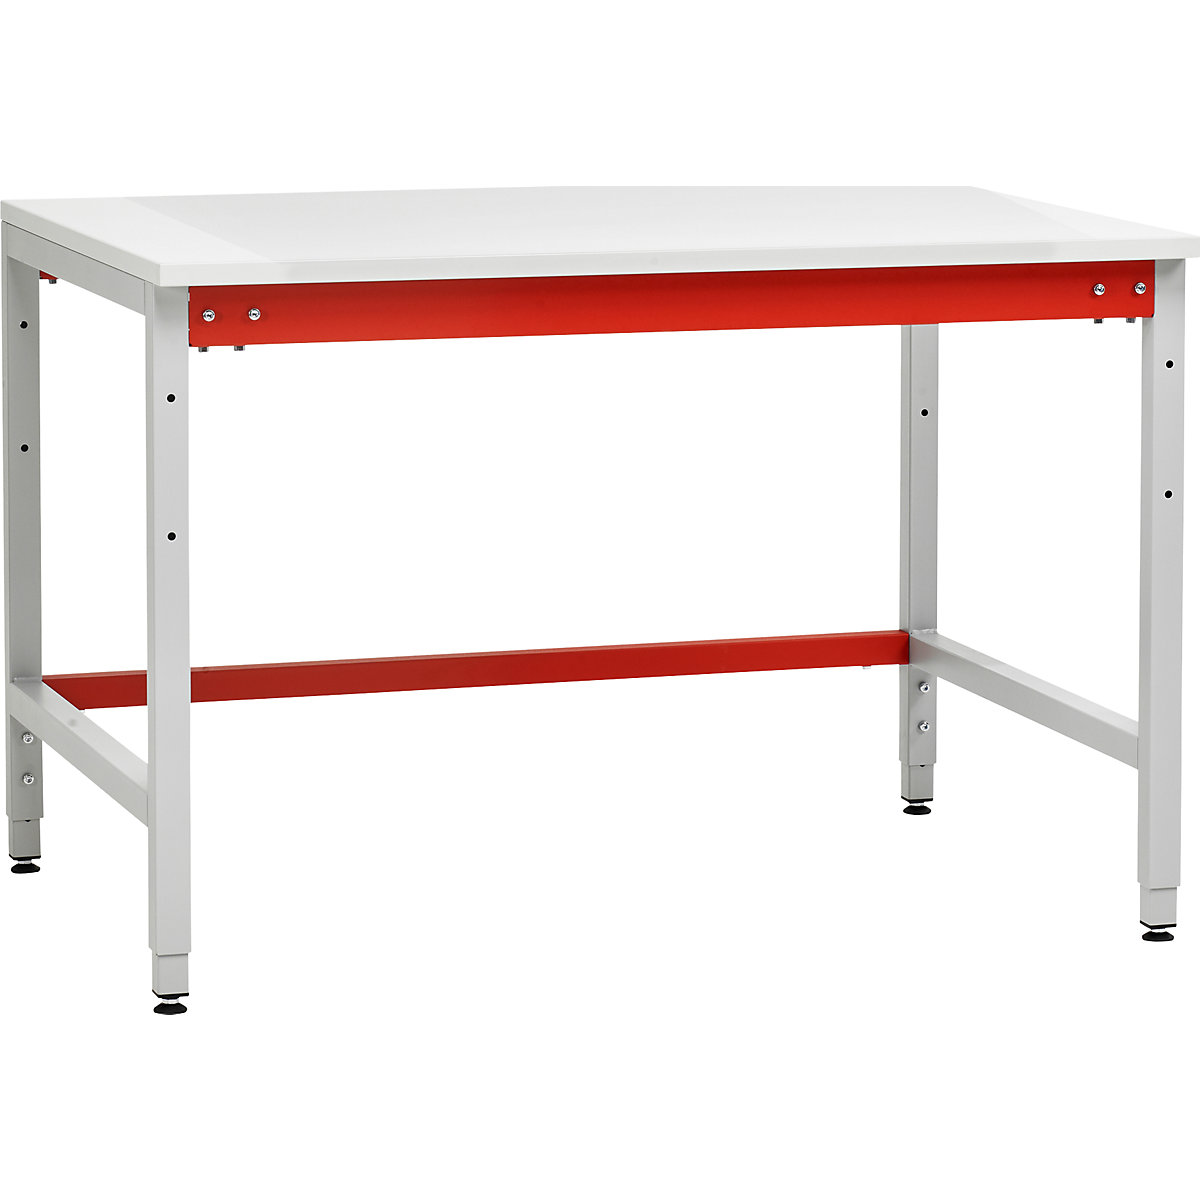 Packing table, standard, HxWxD 780 x 1200 x 900 mm-8